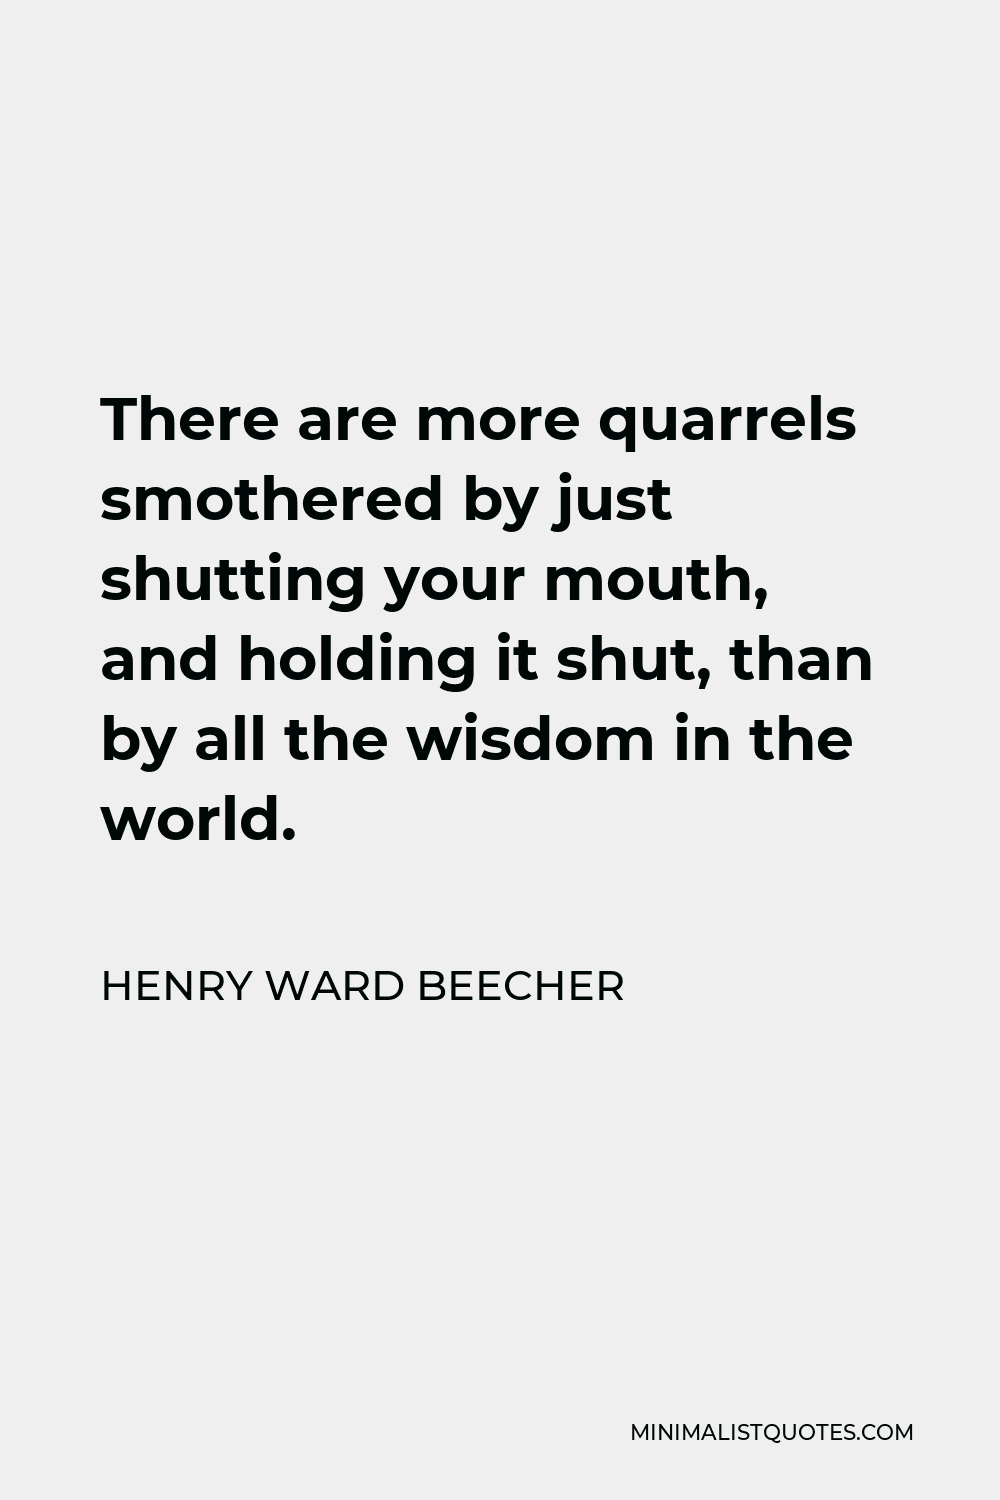 Henry Ward Beecher Quote - There are more quarrels smothered by just shutting your mouth, and holding it shut, than by all the wisdom in the world.